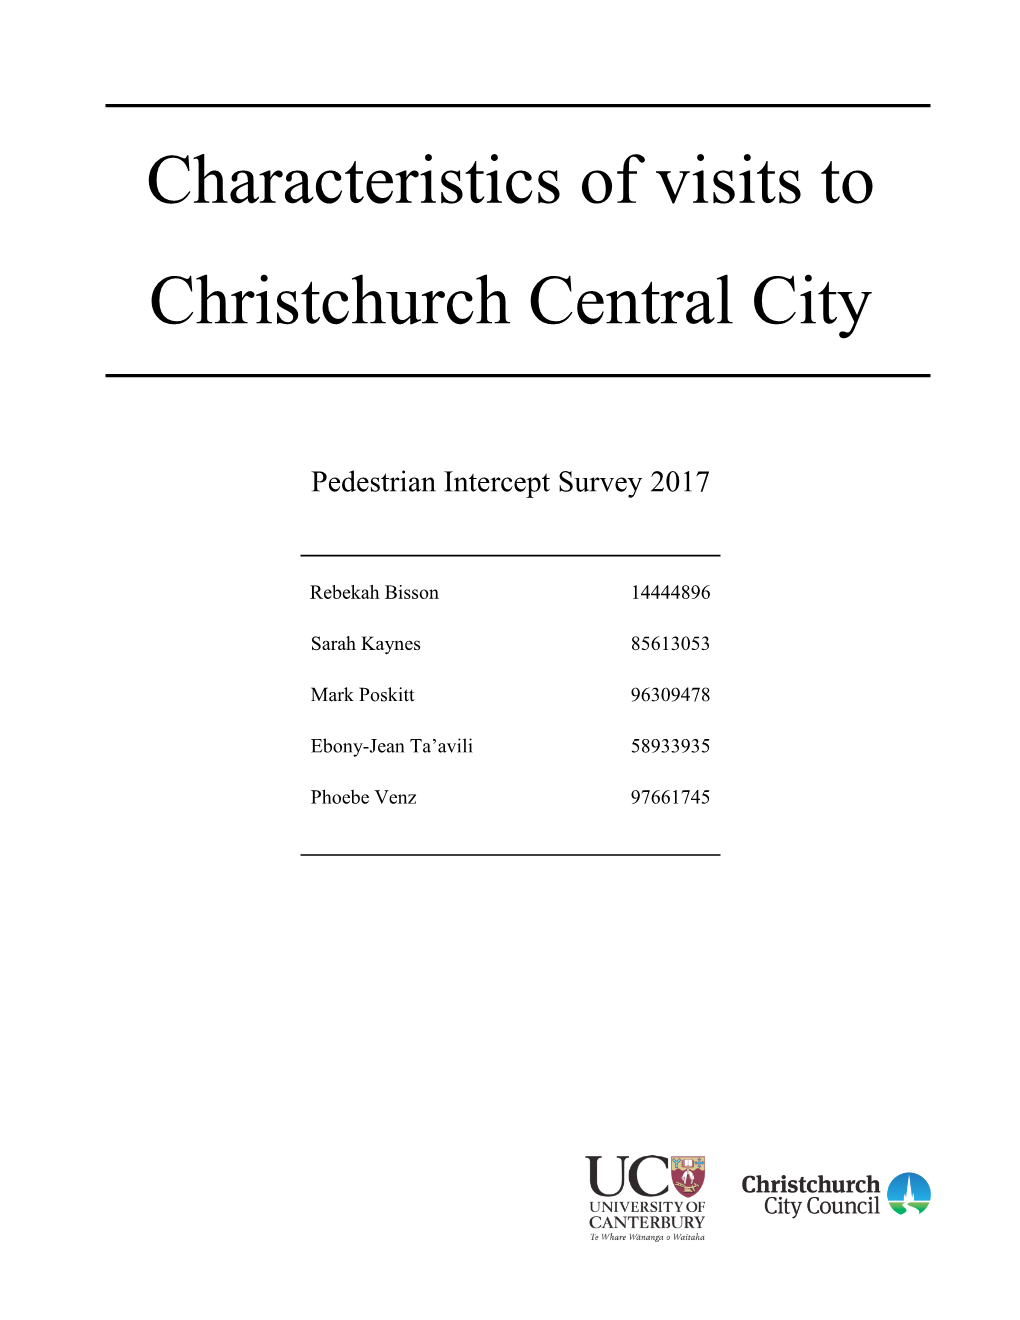 Characteristics of Visits to Christchurch Central City